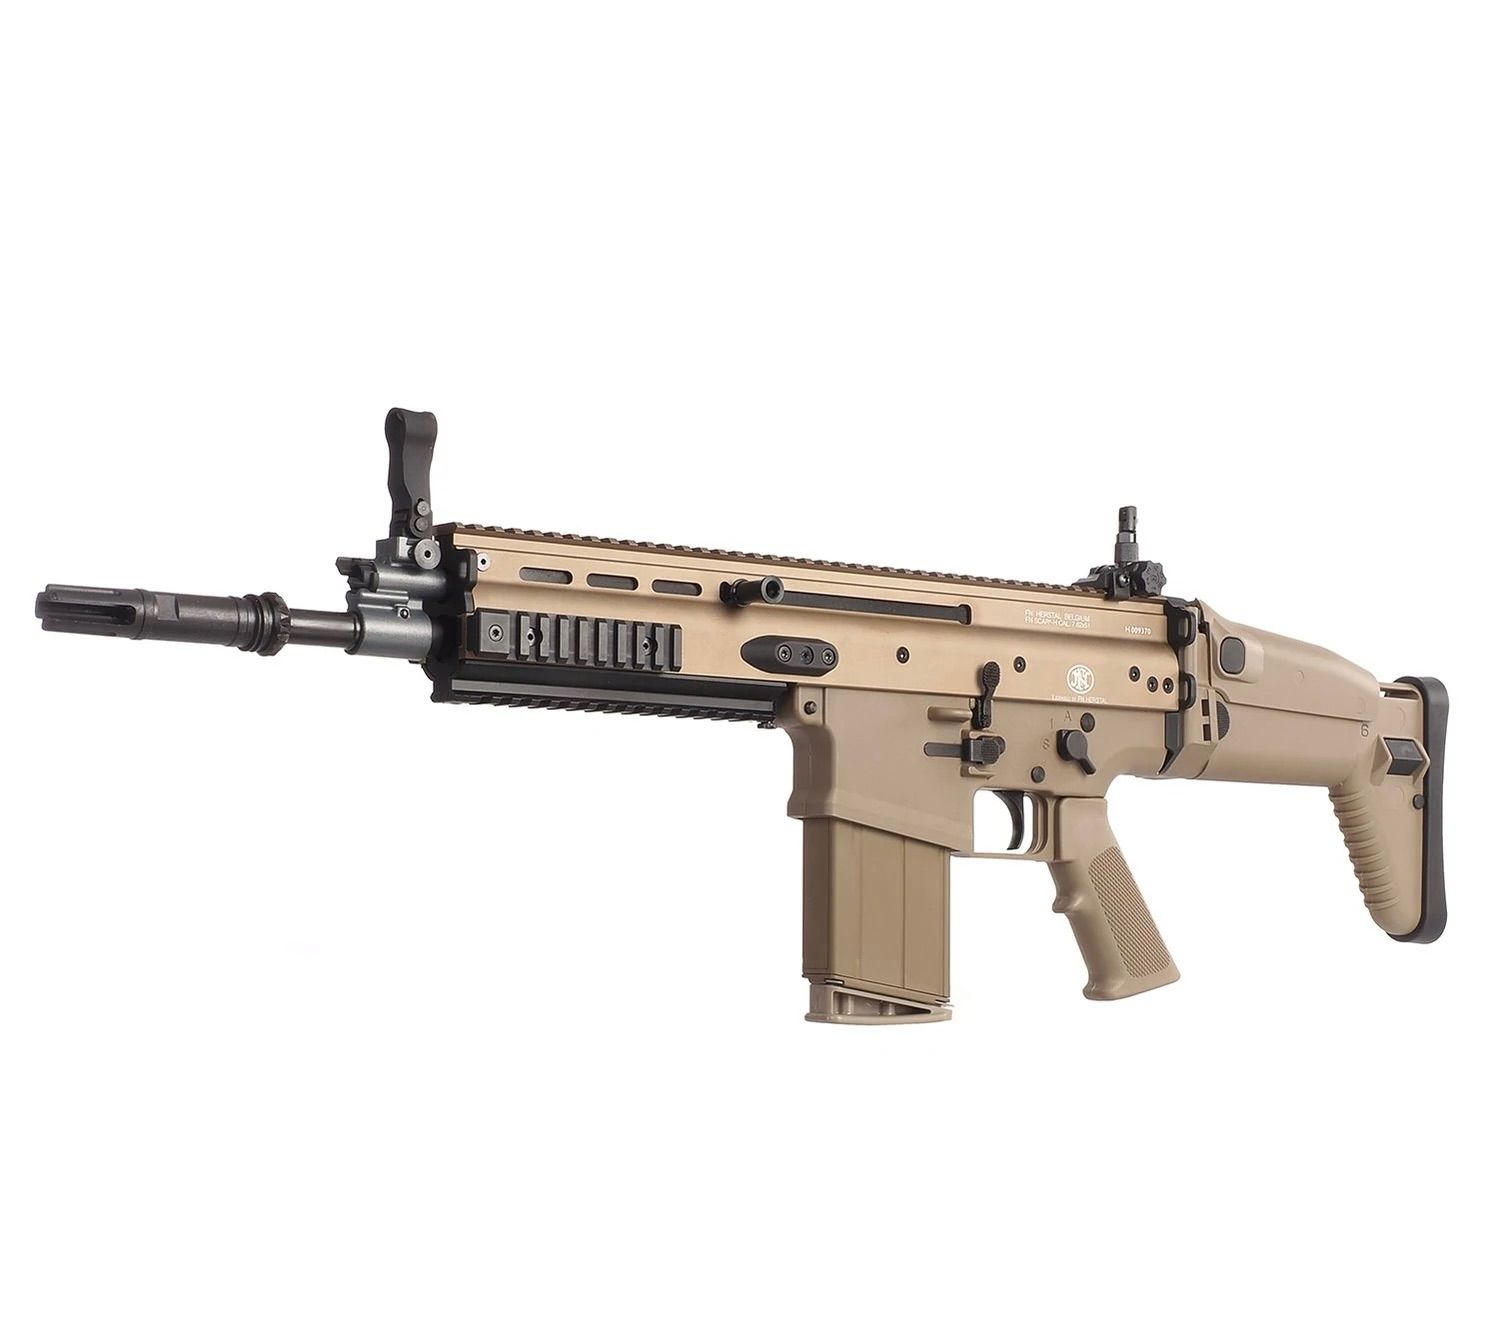 Wanted vfc scar h in tan - Electric Rifles - Airsoft Forums UK